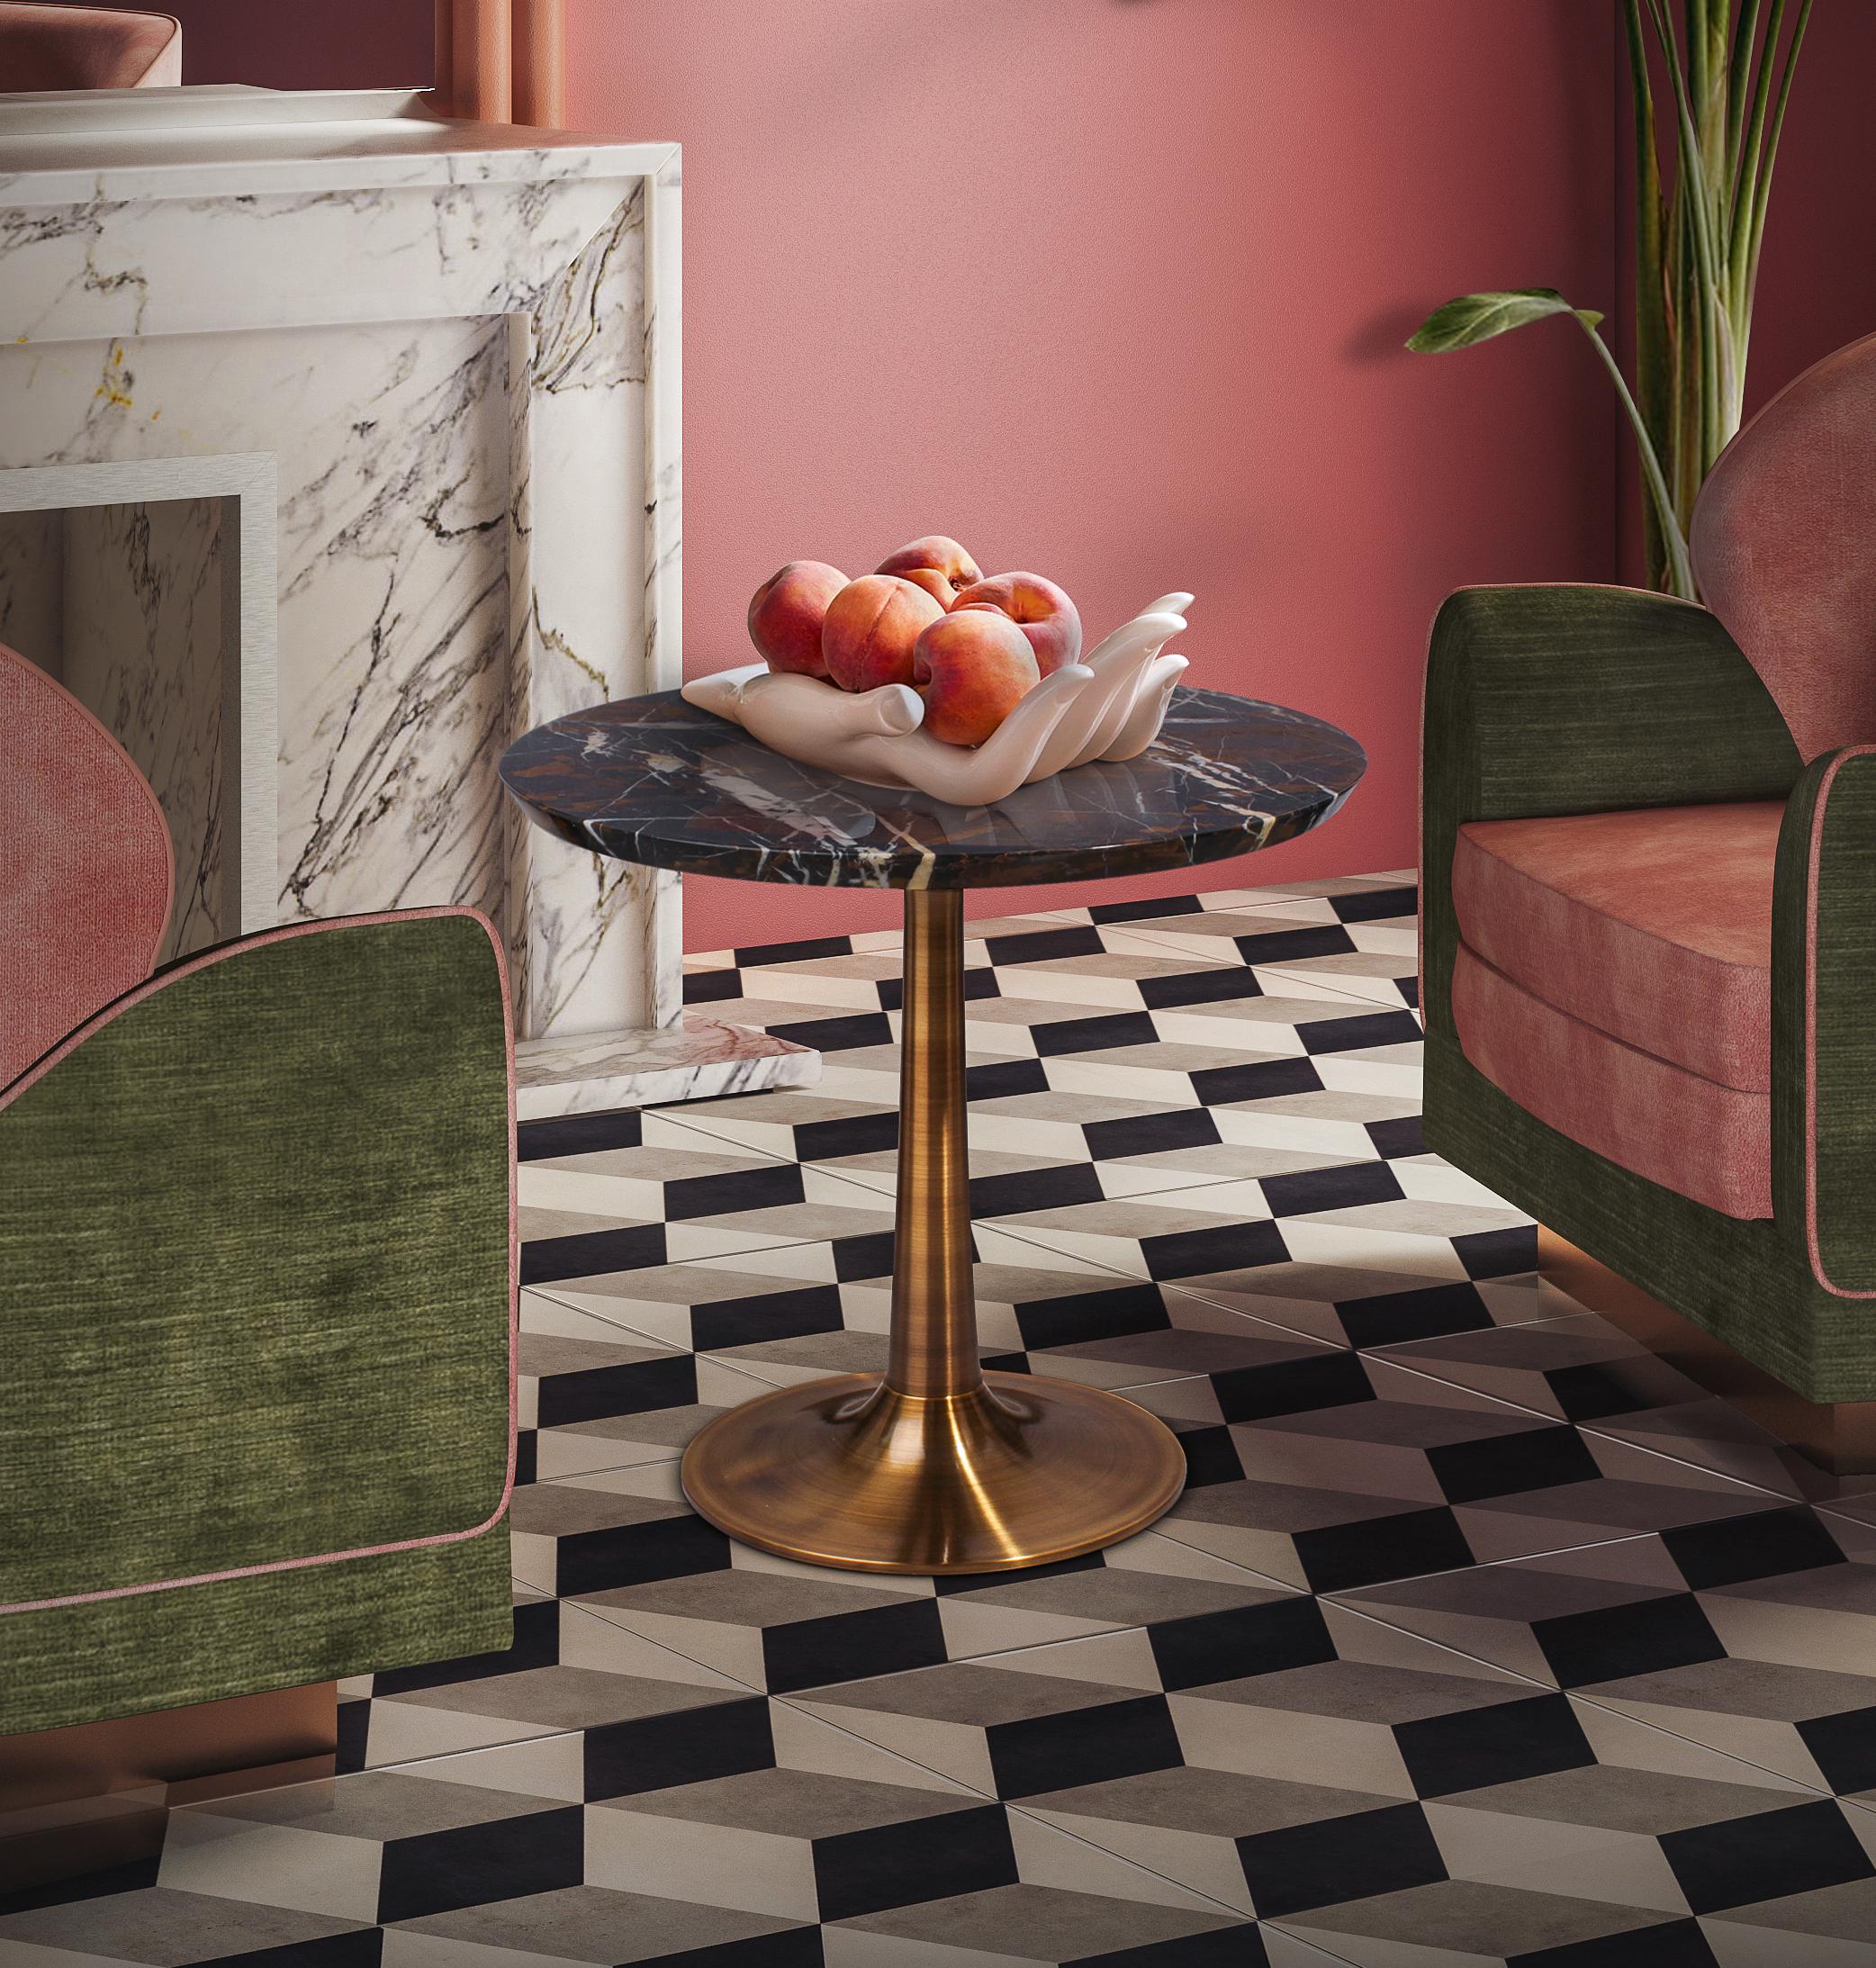 Carsland is a modern side table which blends a very contemporary style with one of the most precious stones in the world, black and gold marble. The top in black and gold marble, composed of recrystallized carbonate minerals, features a black color